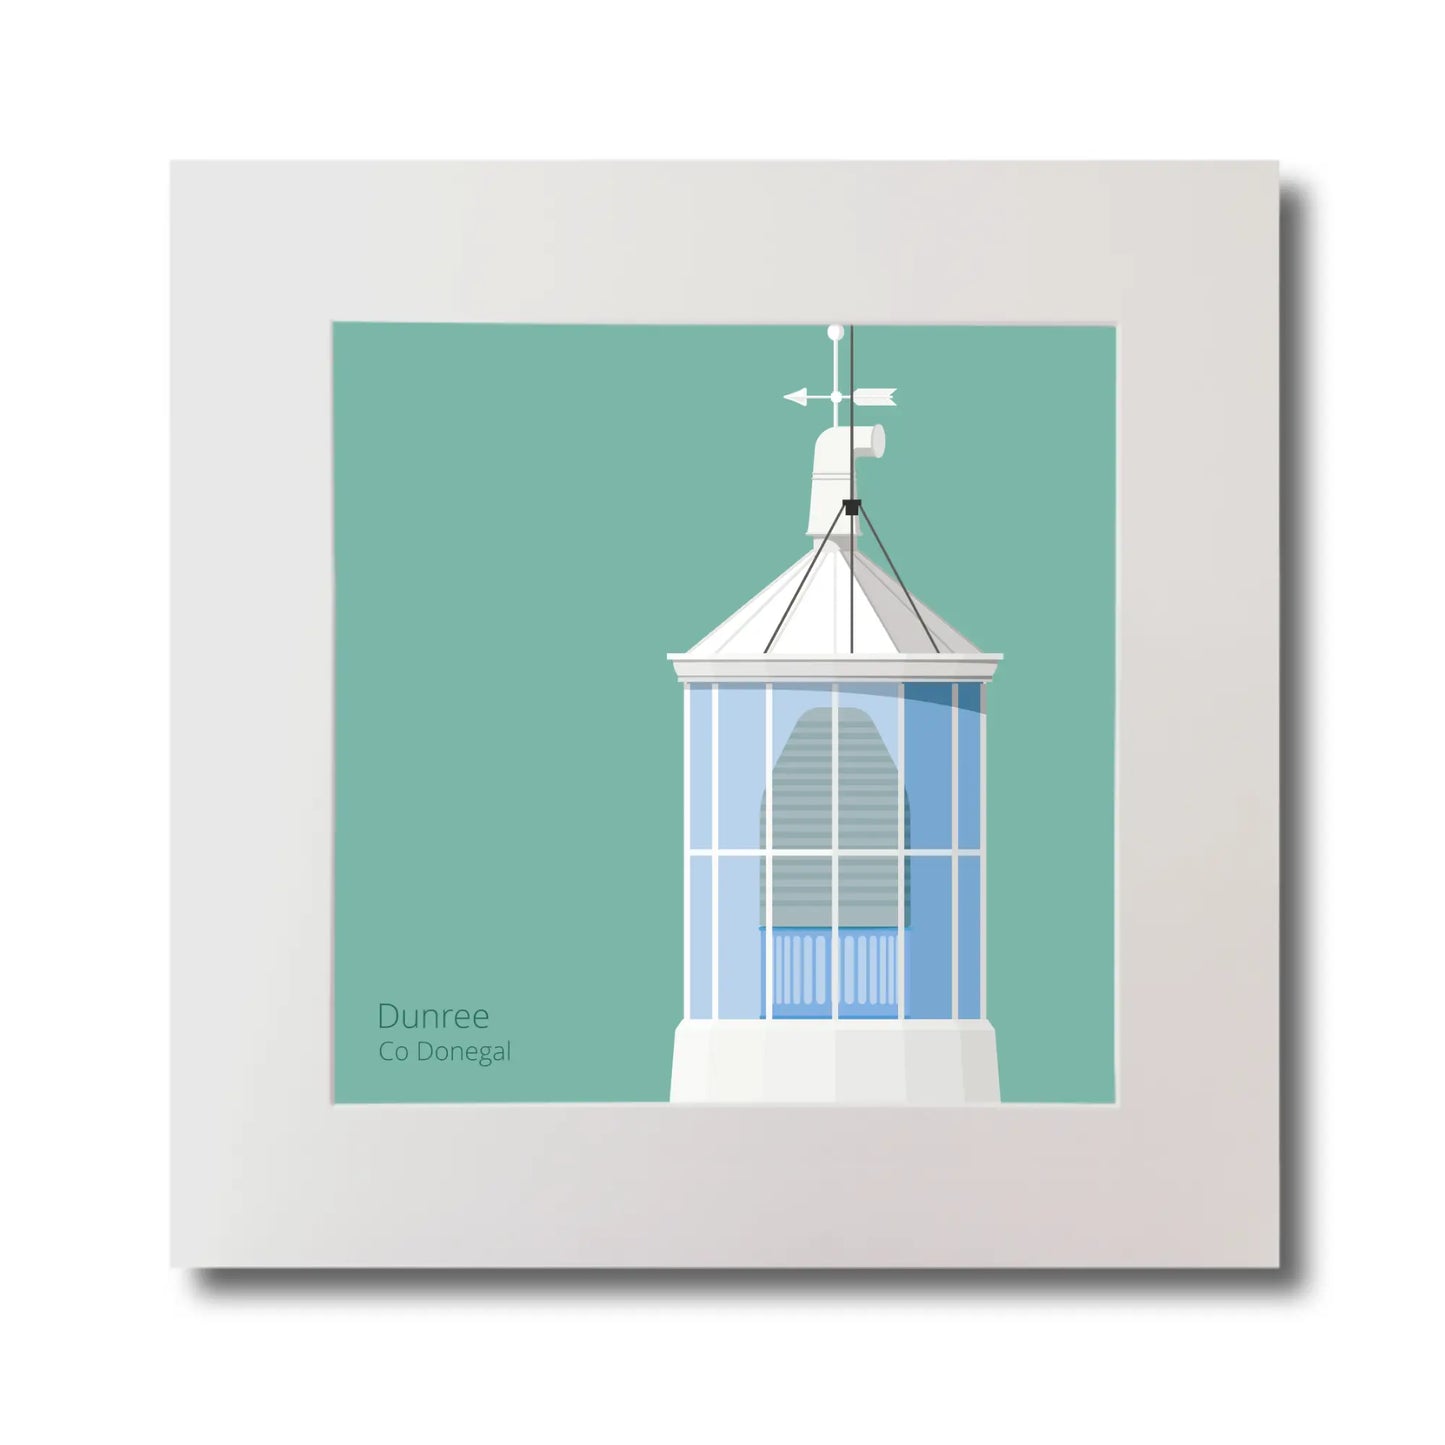 Illustration Dunree lighthouse on an ocean green background, mounted and measuring 30x30cm.